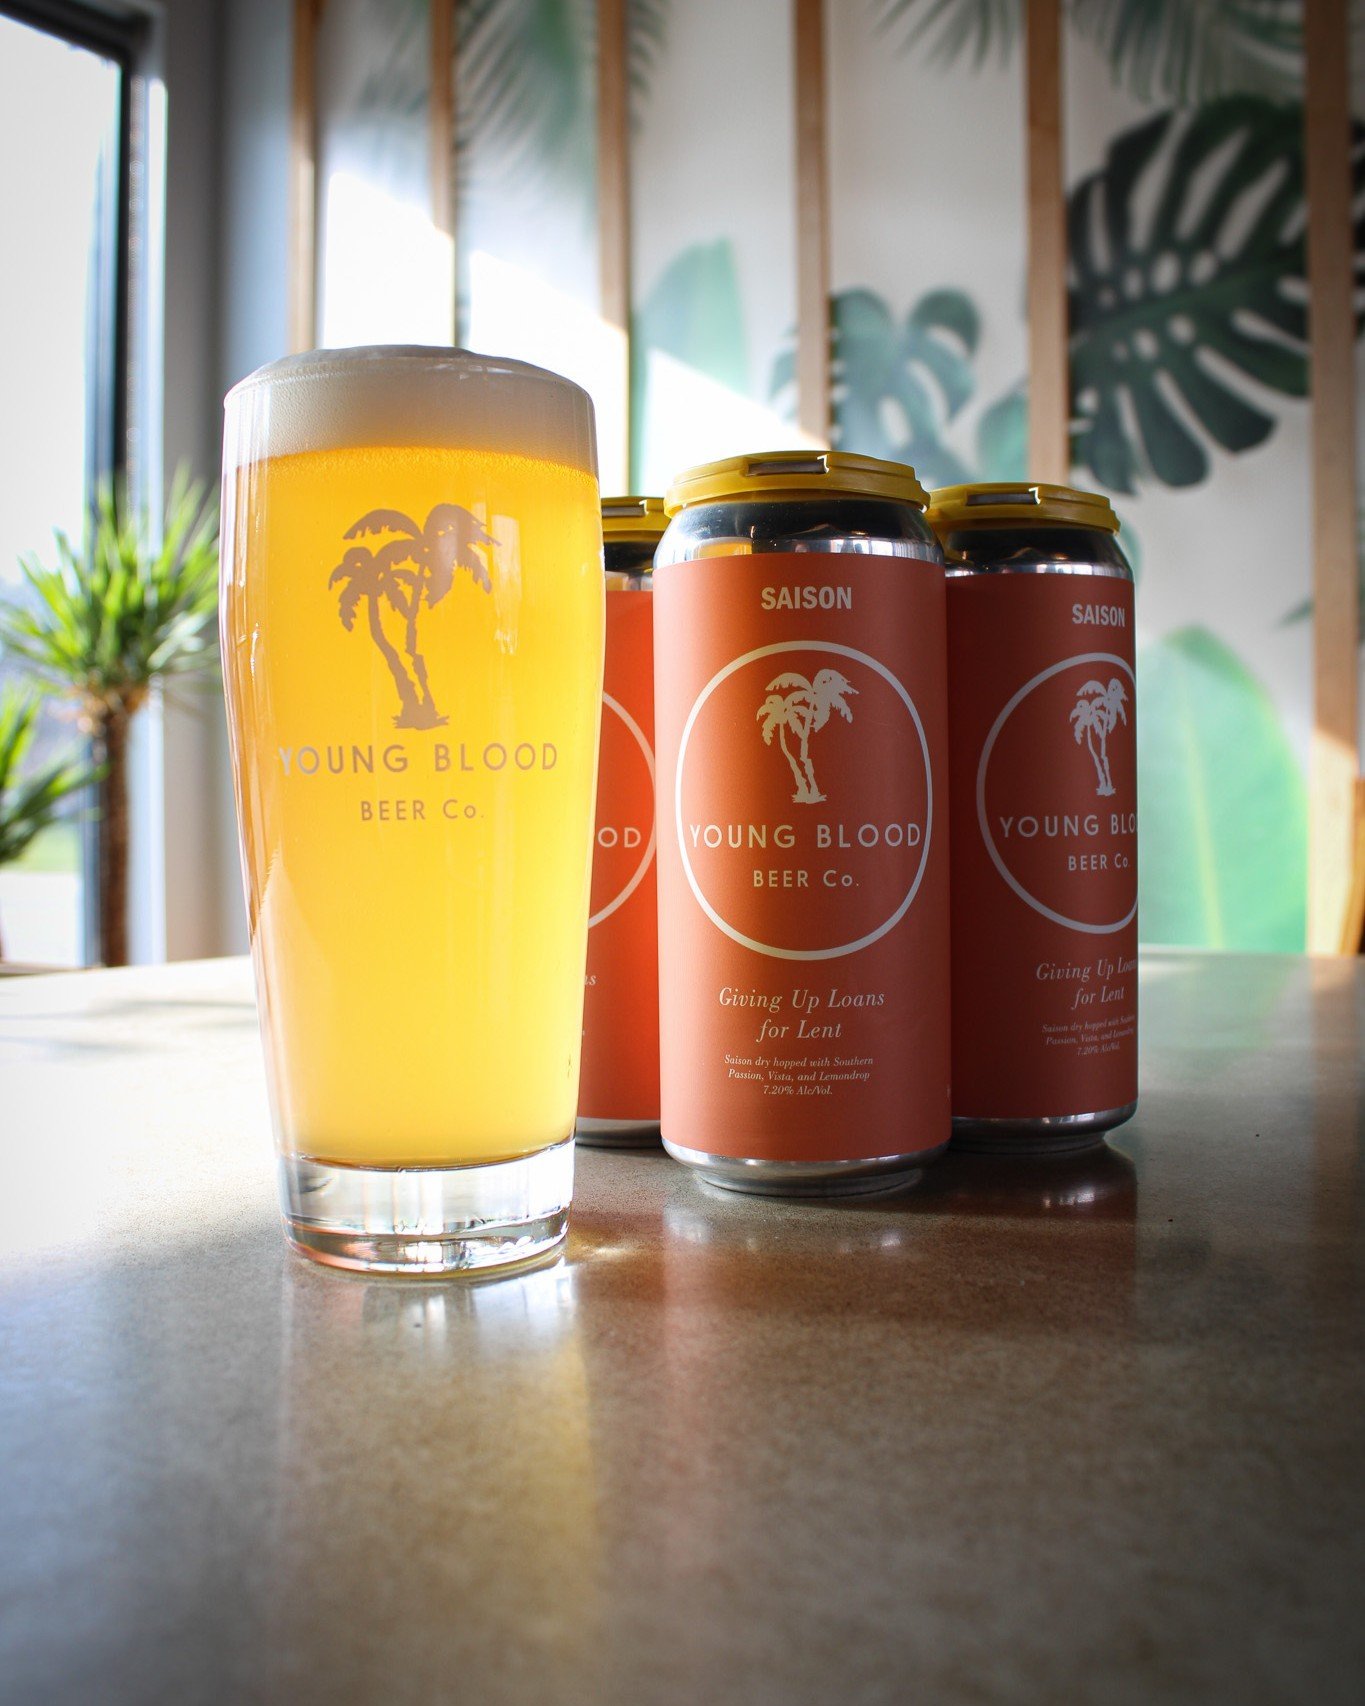 Happy Saison Day to all those who celebrate! 🎊

It's the perfect day for you to visit our Northstret taproom and either pick up a four-pack or sip on a pint of Giving Up Loans for Lent.

It's a Saison, dry-hopped with Southern Passion, Vista &amp; L